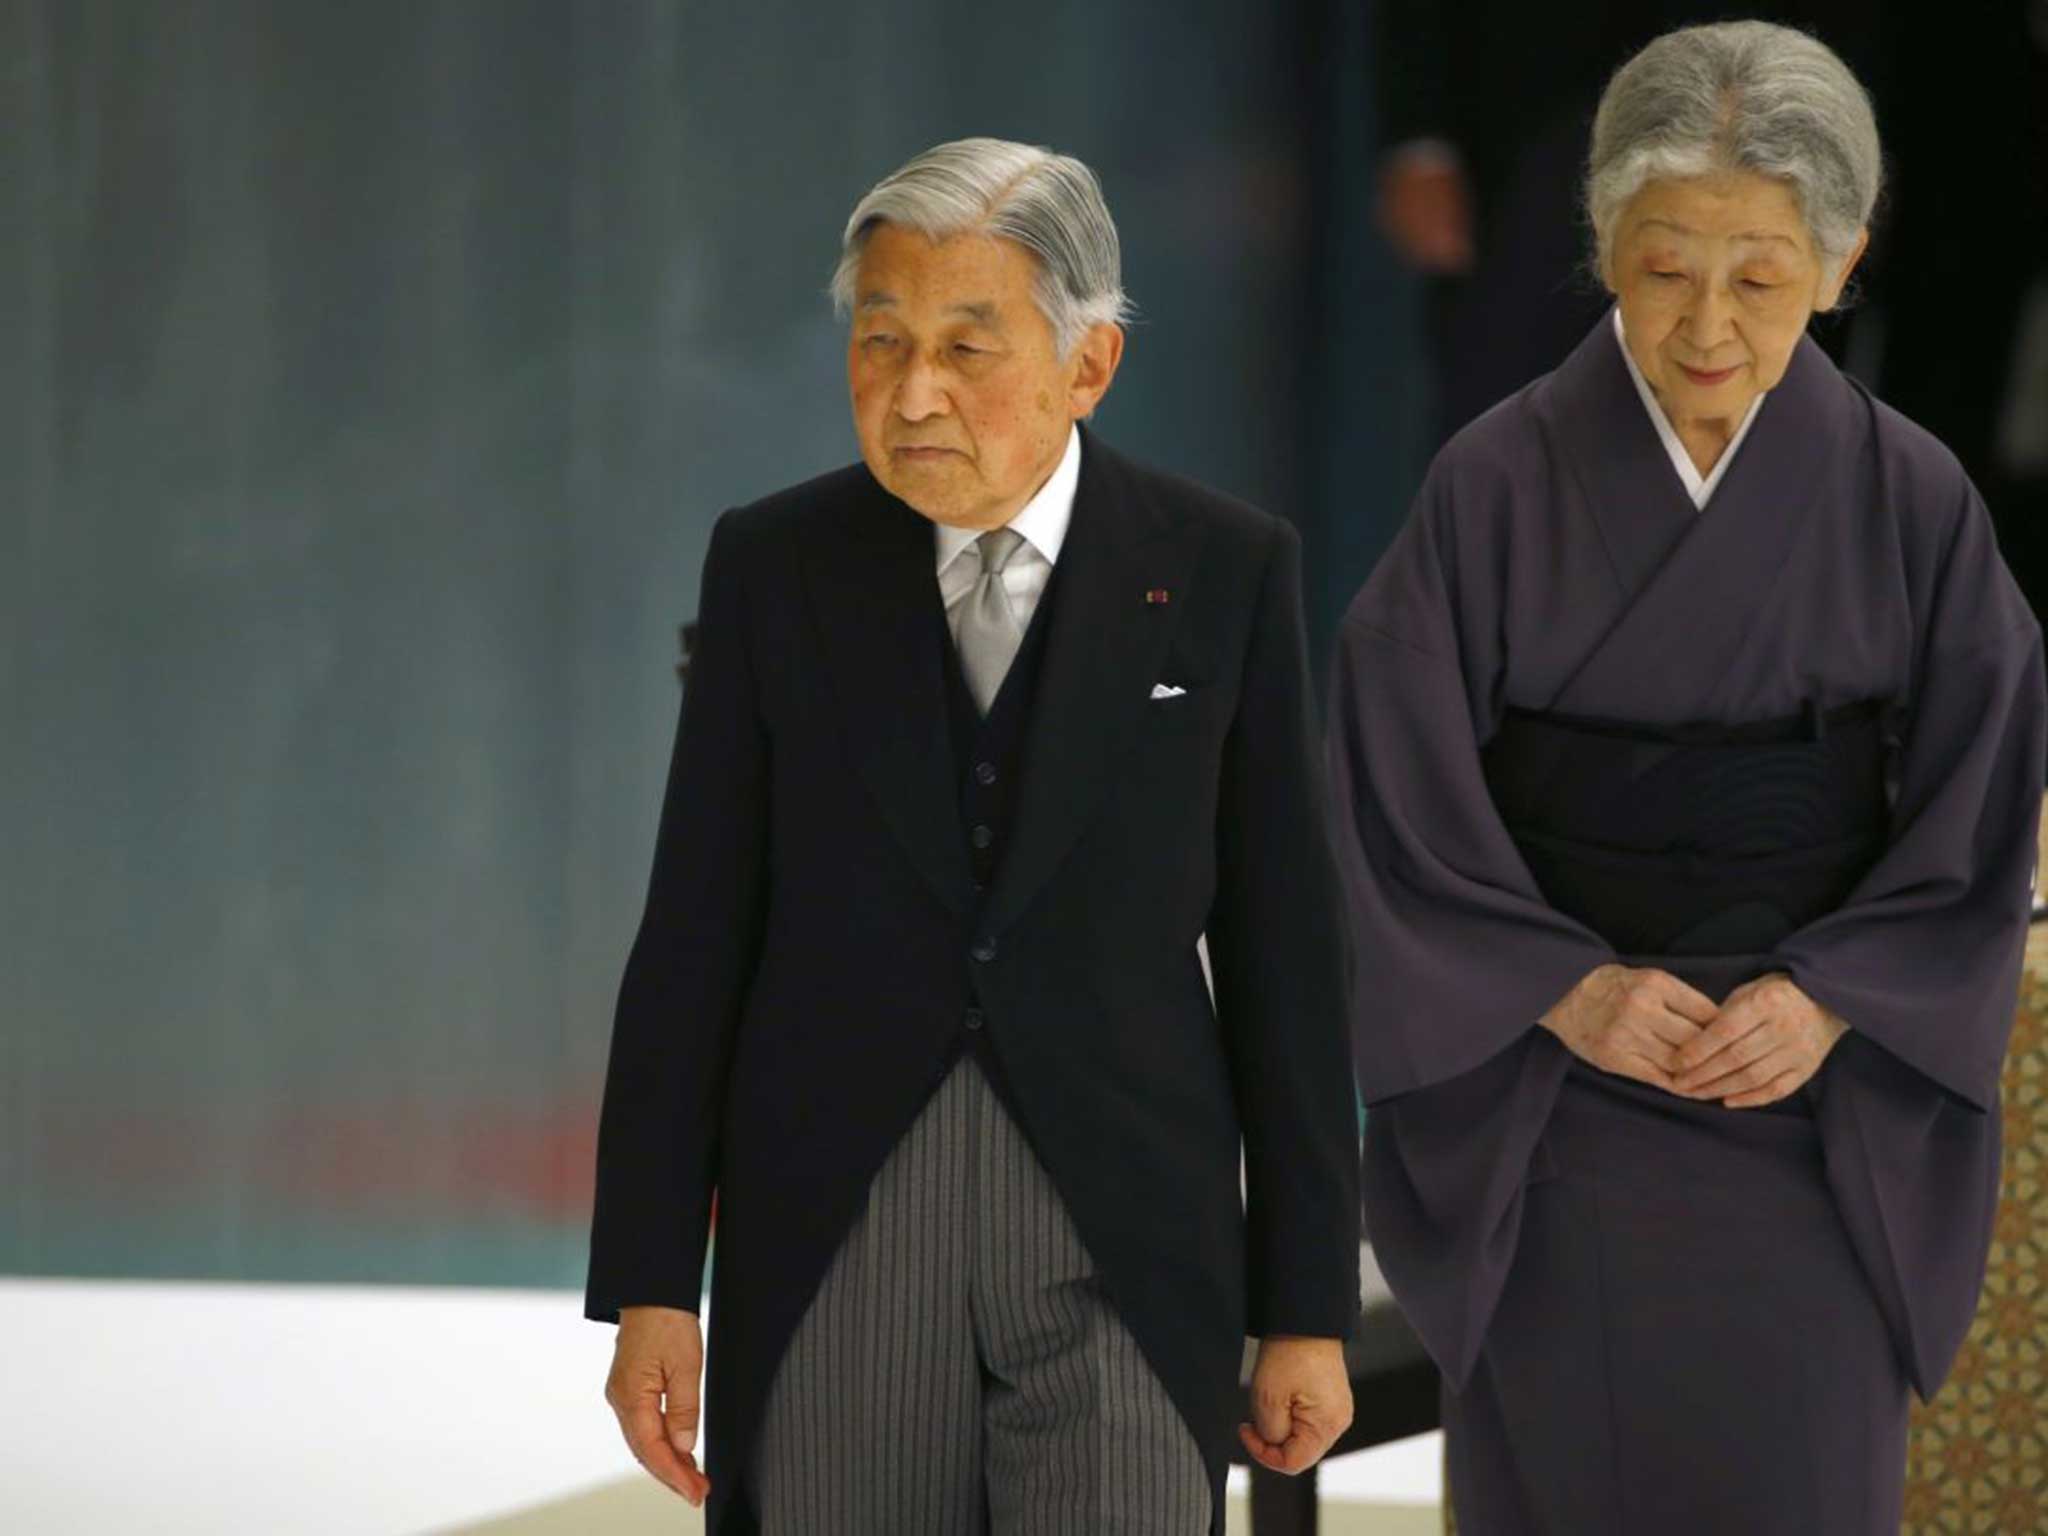 Japan's Emperor Akihito, accompanied by Empress Michiko, leaves after delivering his remarks